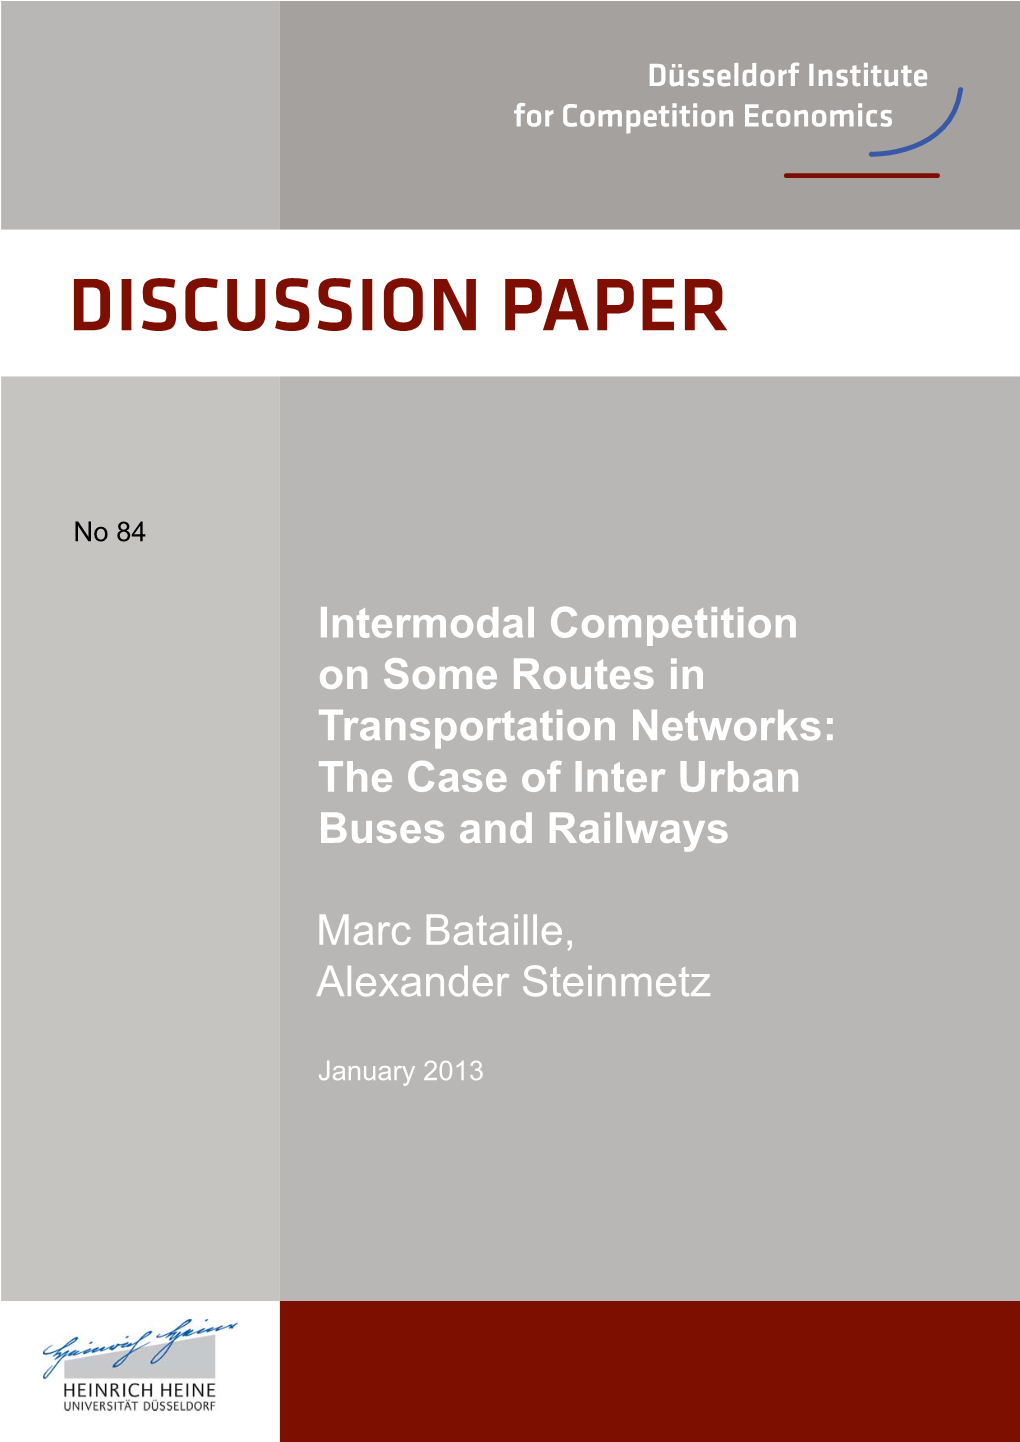 Intermodal Competition on Some Routes in Transportation Networks: the Case of Inter Urban Buses and Railways